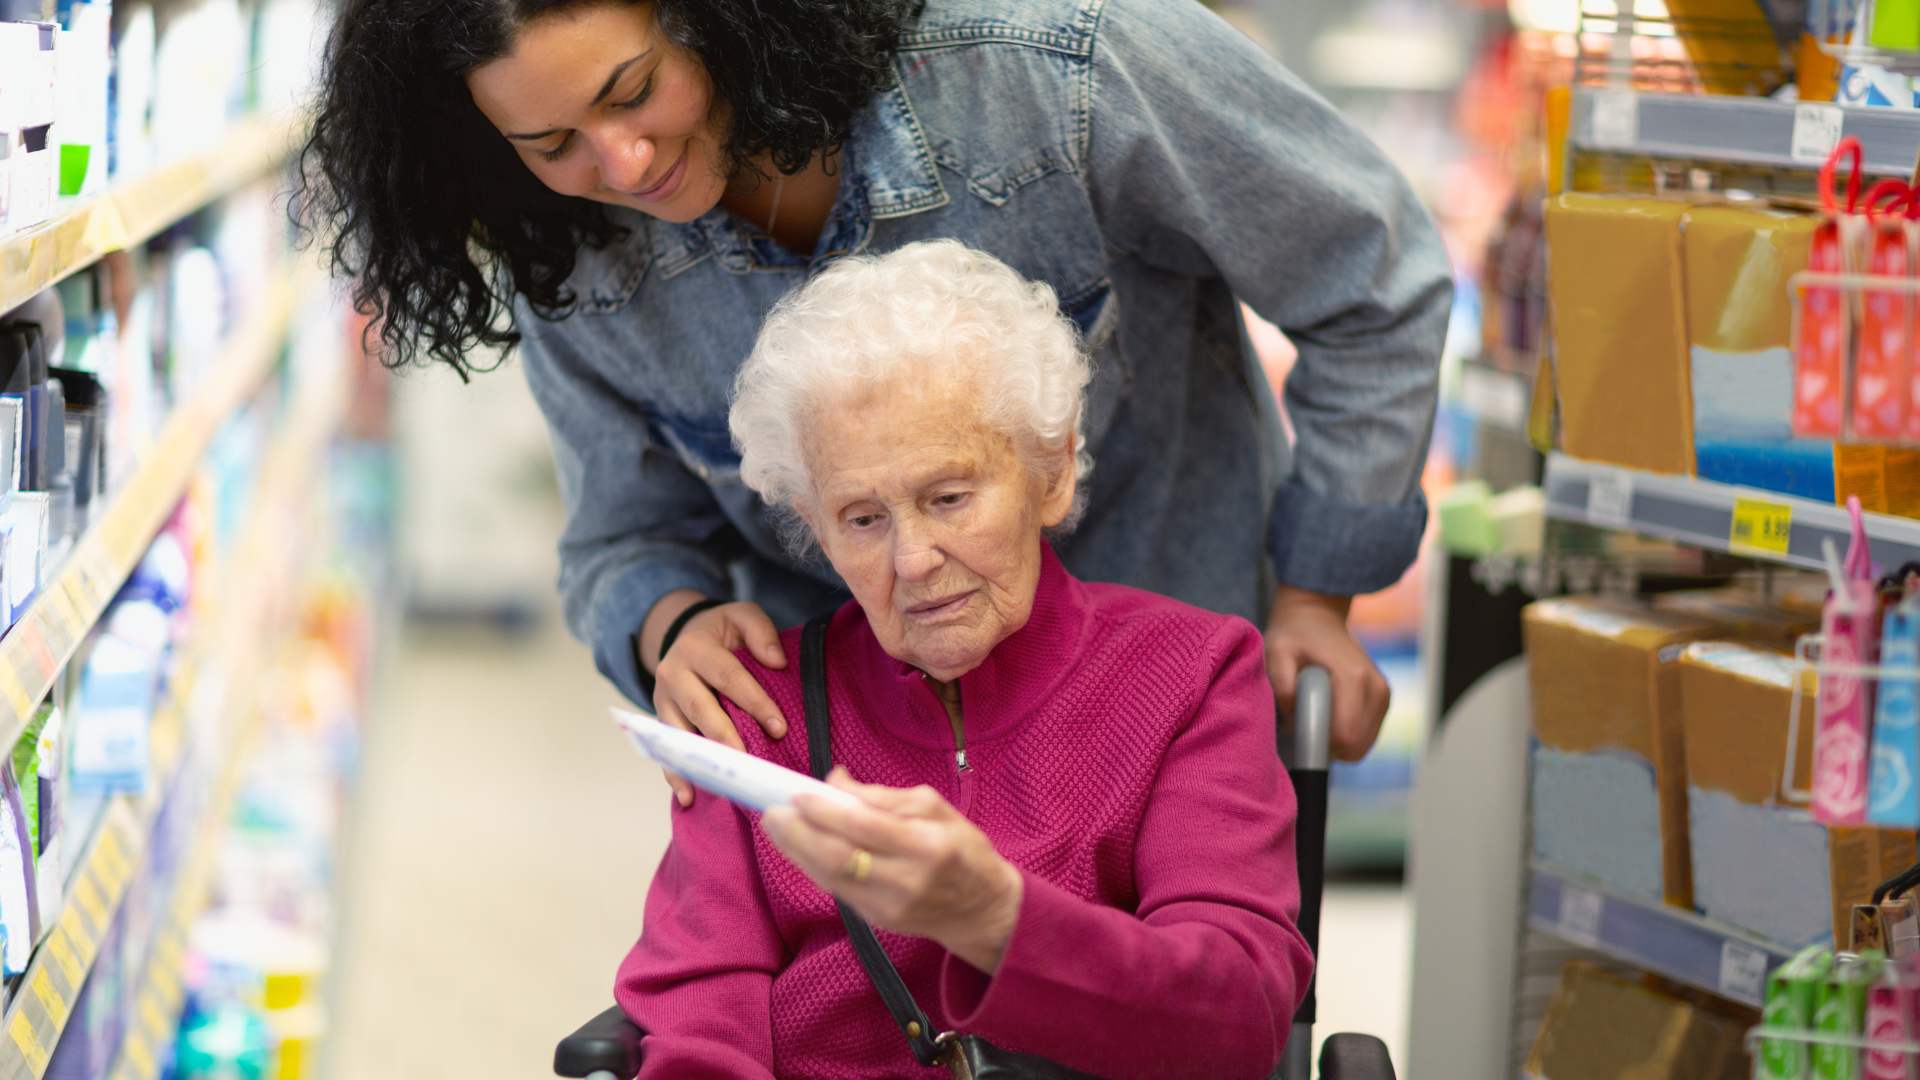 Caregiver helping senior woman with shopping